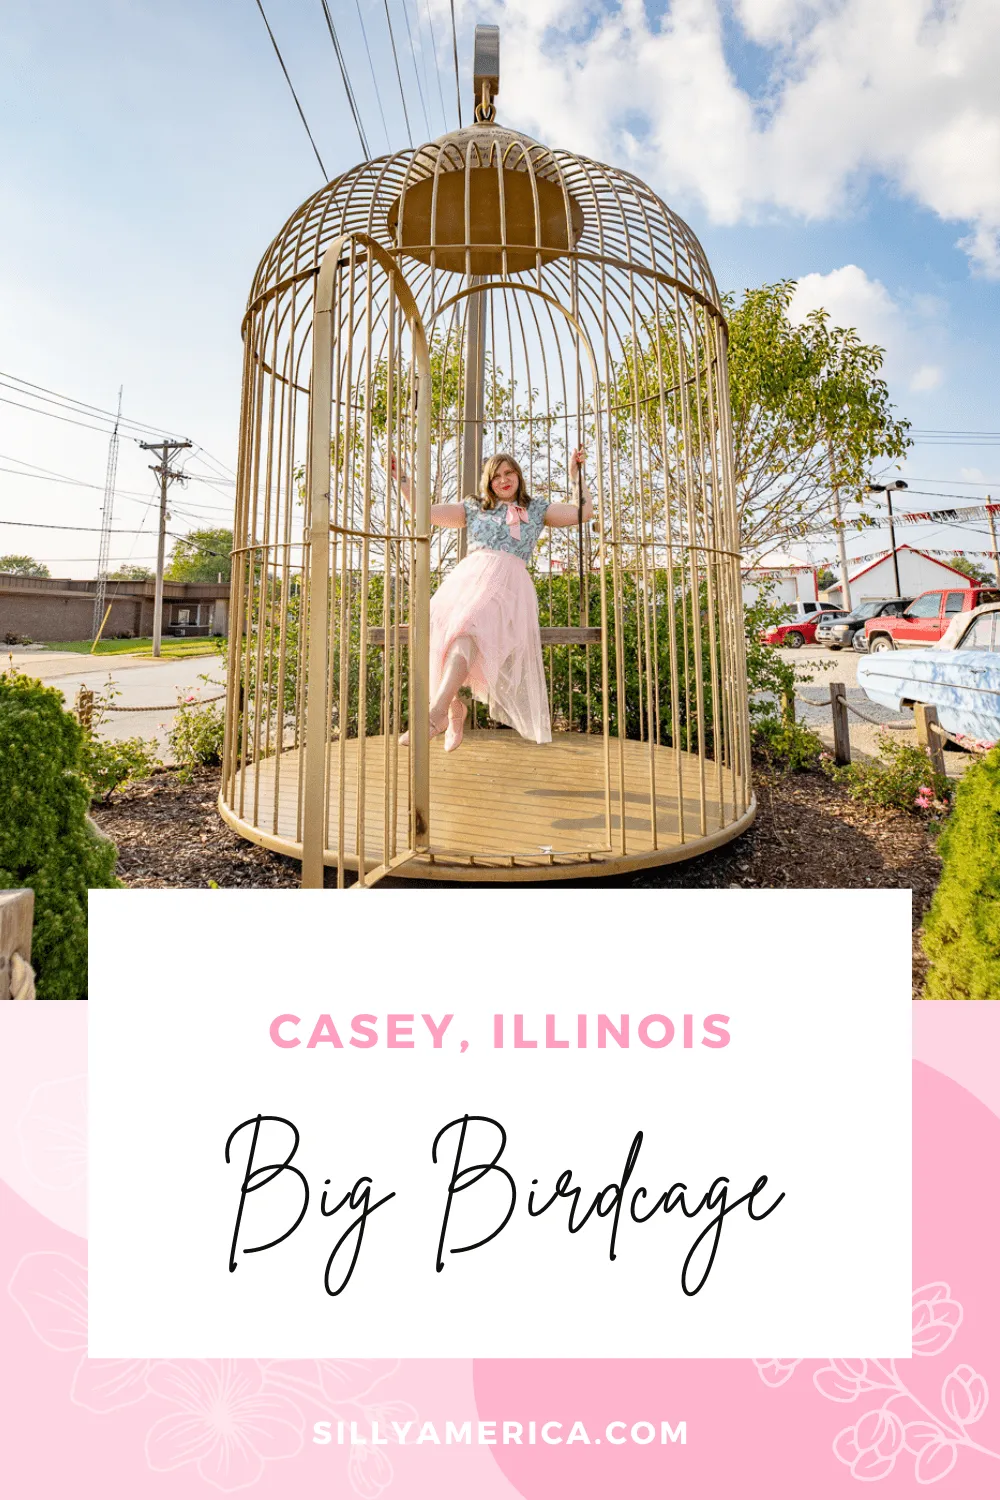 Casey, Illinois is a small town known for its big things. One of the most popular roadside attractions in Casey isn't one of the world's largest, but its big size and interactivity make it a well-beloved stop. Spread your wings and get ready to perch inside the the big birdcage in Casey, Illinois.  #IllinoisRoadsideAttractions #IllinoisRoadsideAttraction #RoadsideAttractions #RoadsideAttraction #RoadTrip #IllinoisRoadTrip #IllinoisWeekendGetaways #IllinoisWithKids #IllinoisRoadTripTravel 